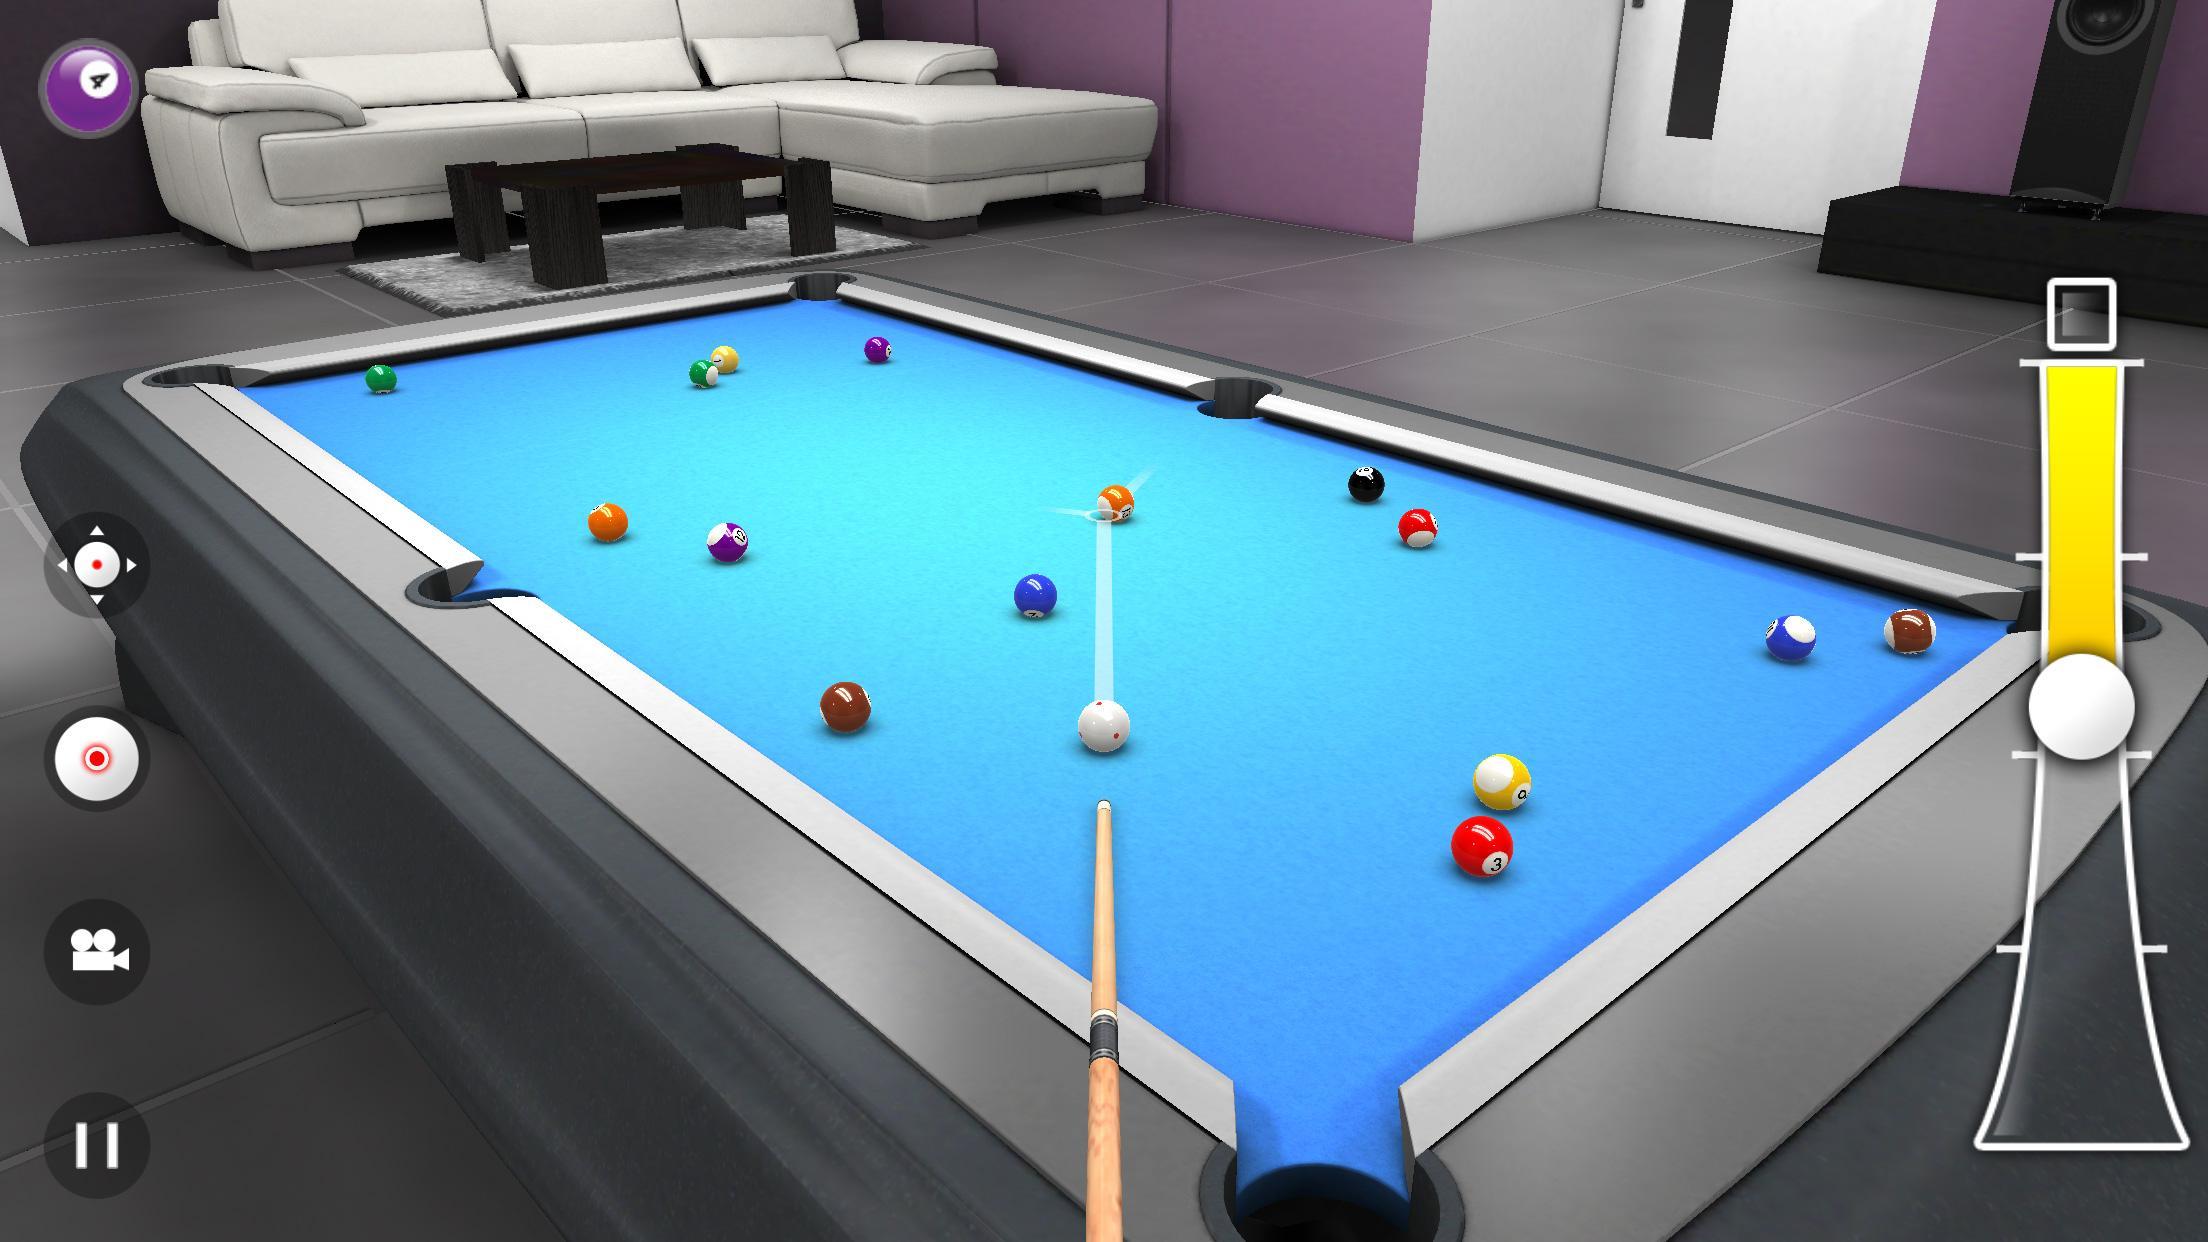 Pool Billiards for Android - APK Download